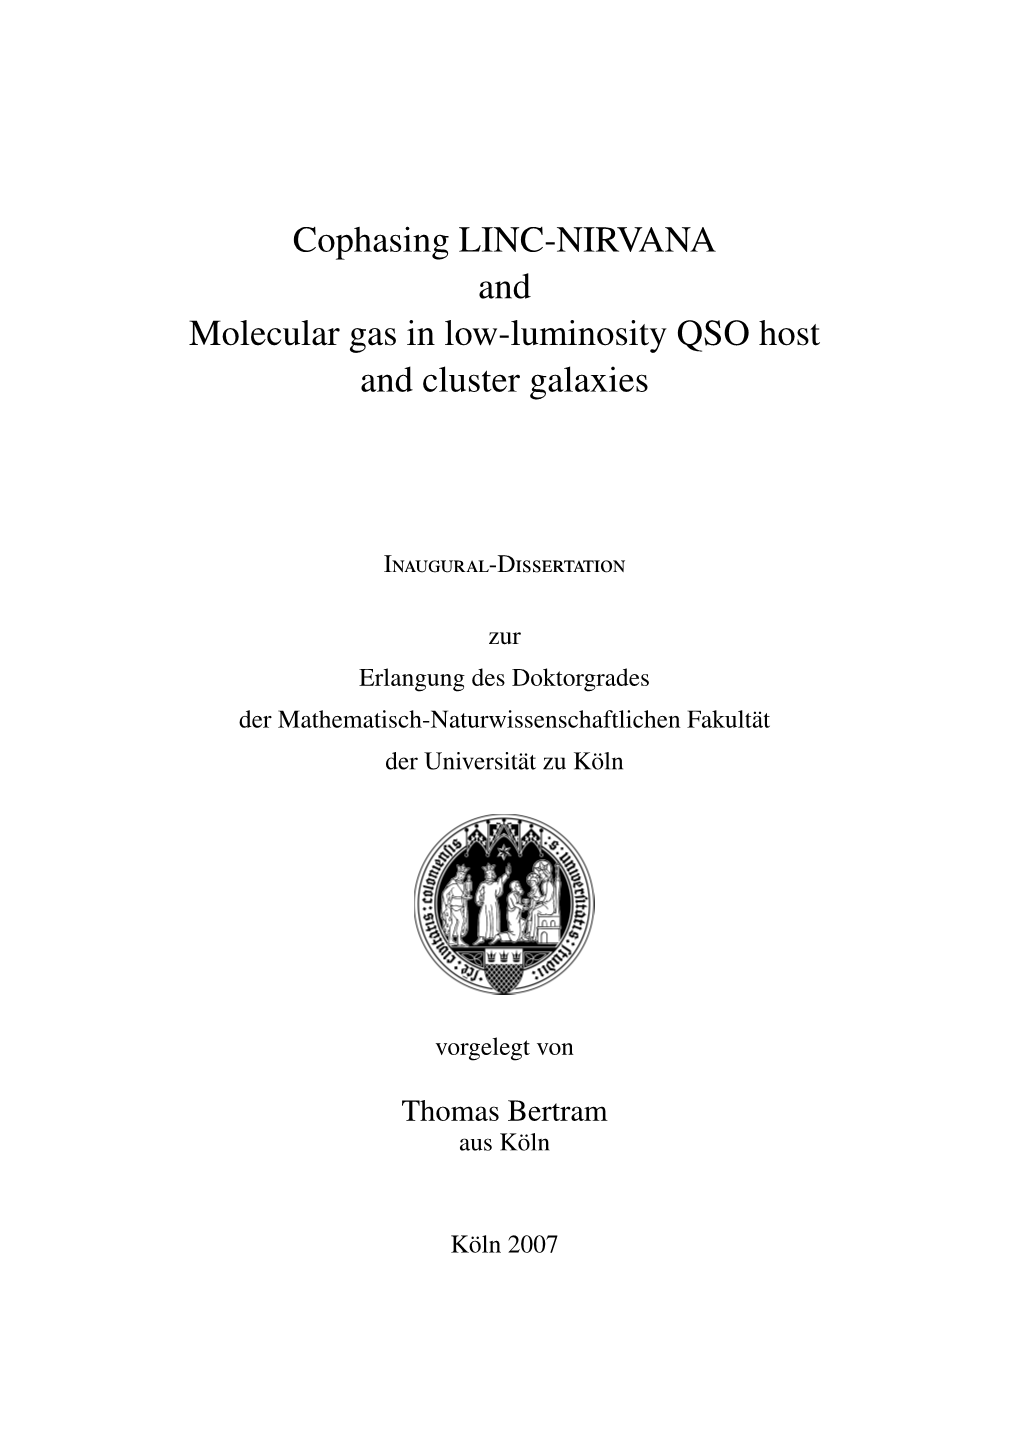 Cophasing LINC-NIRVANA and Molecular Gas in Low-Luminosity QSO Host and Cluster Galaxies